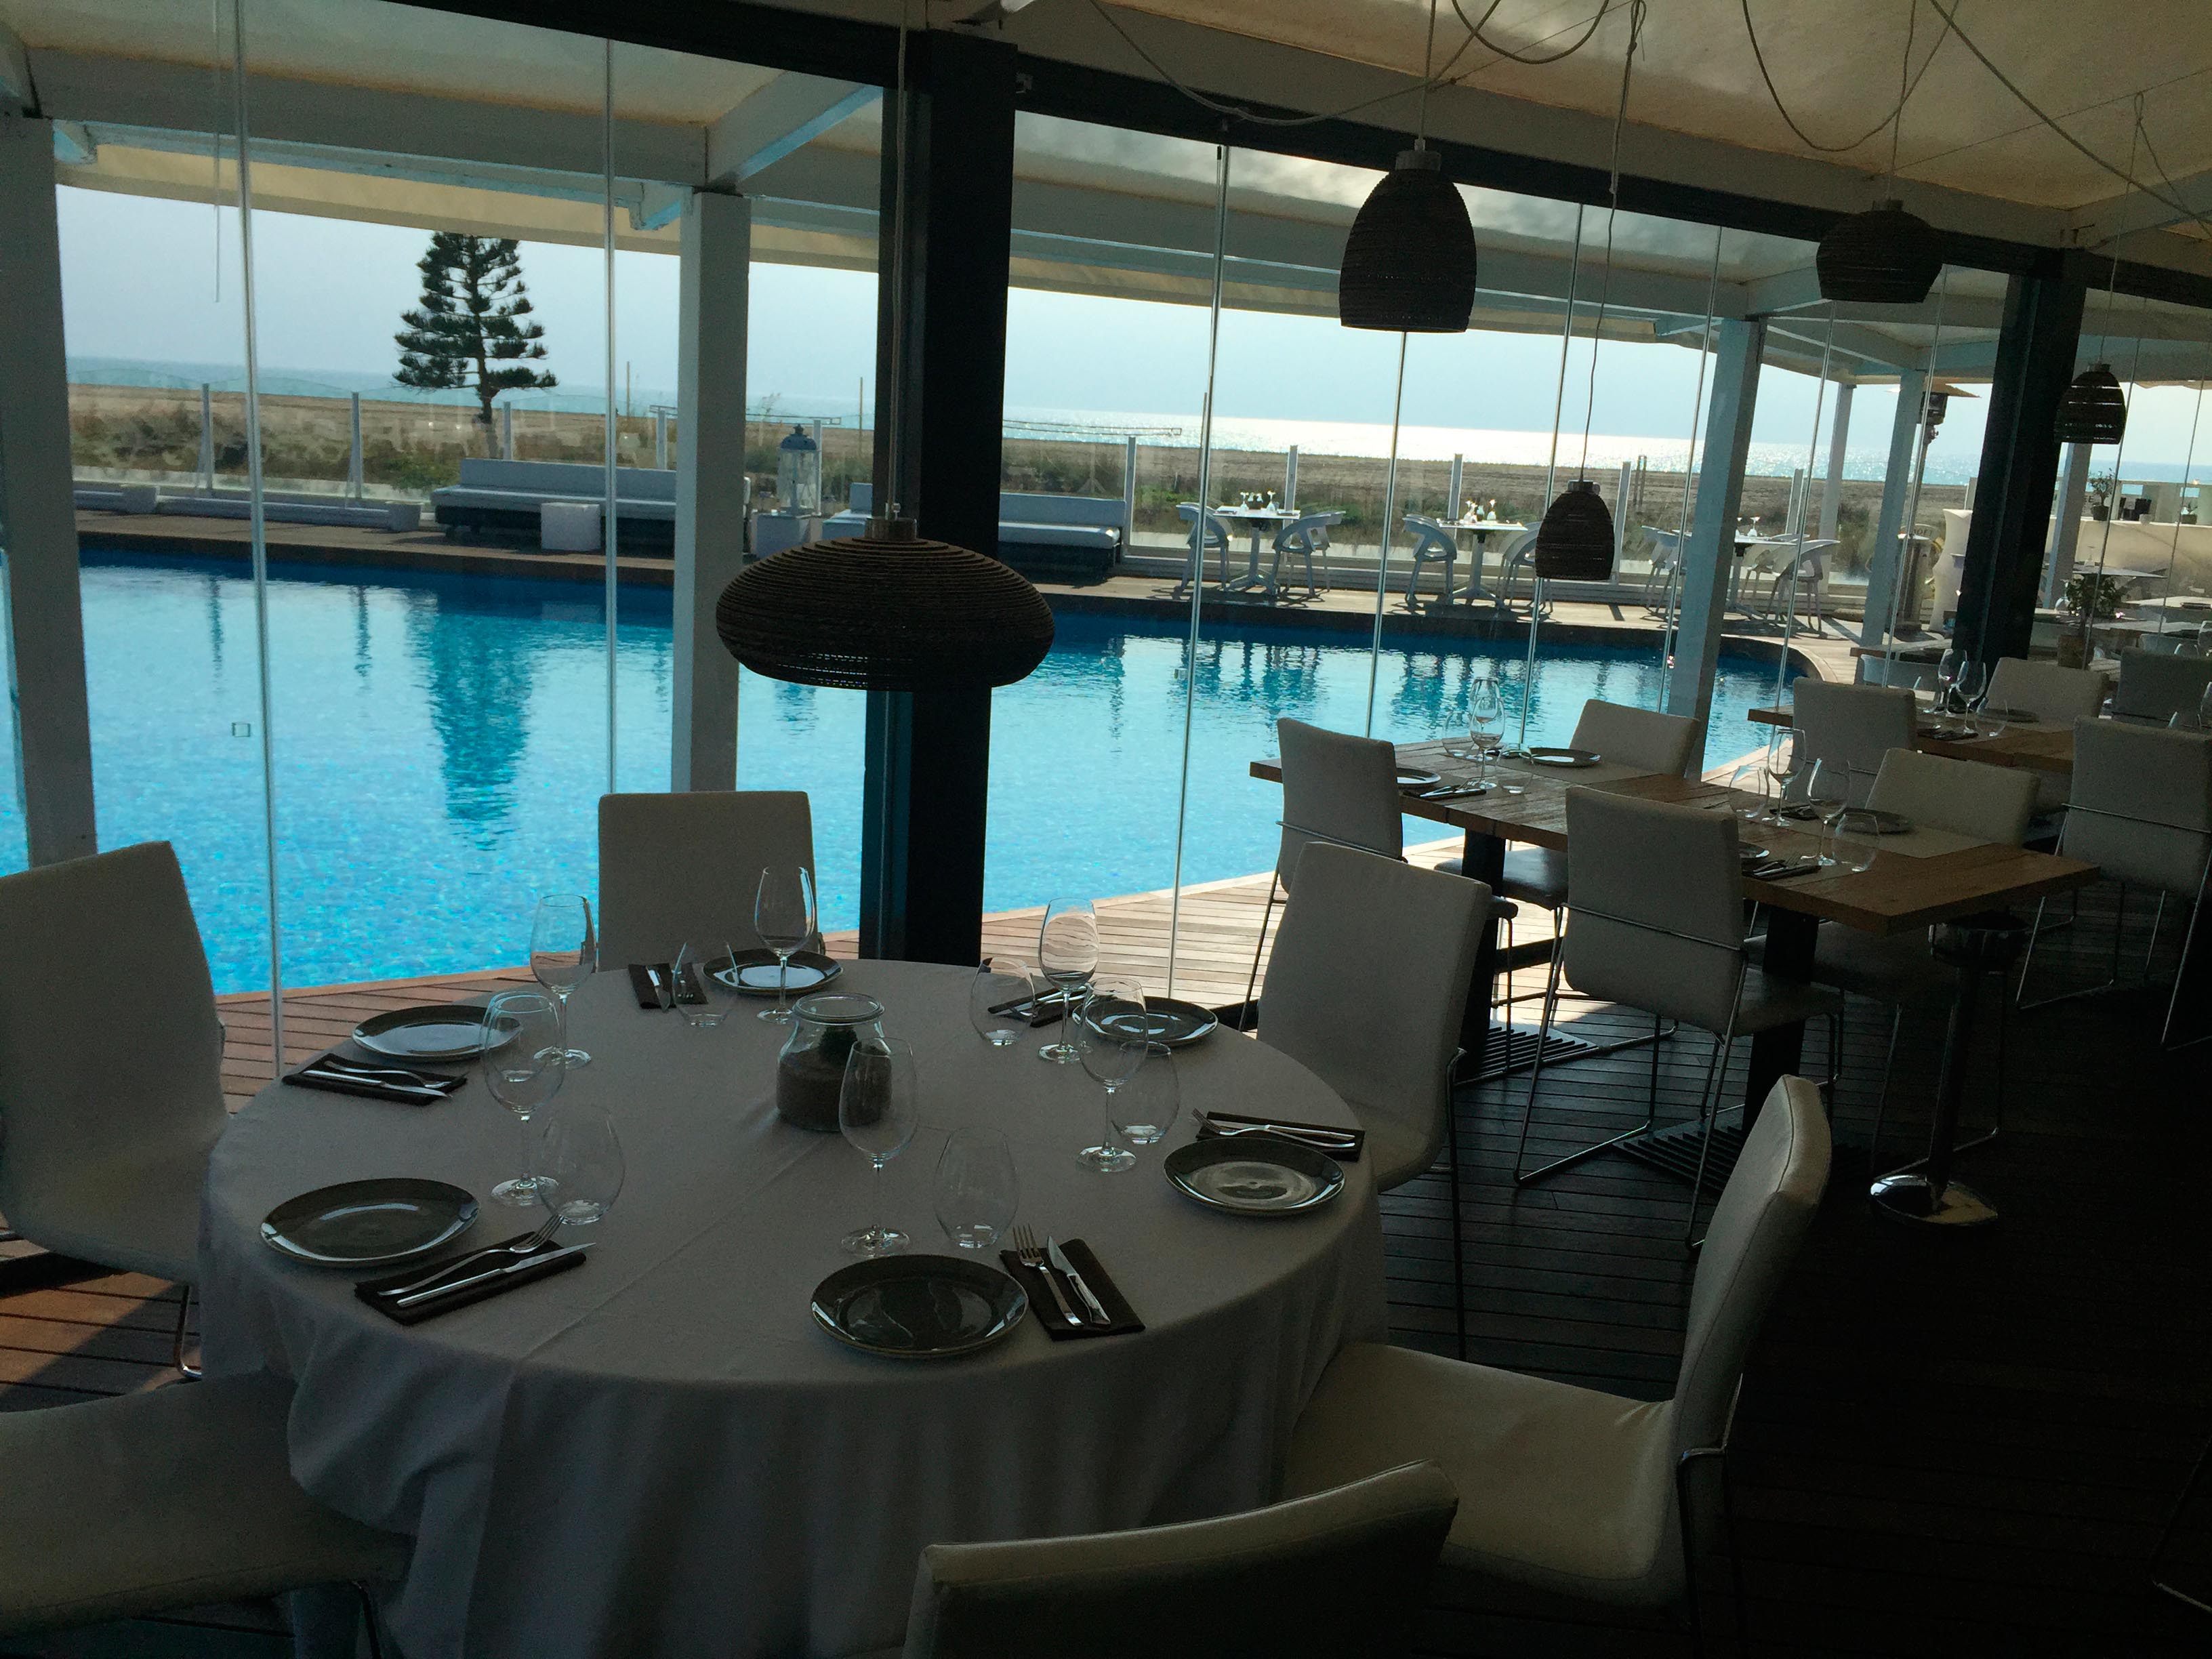 Glass enclosure in a restaurant in Castelldefels